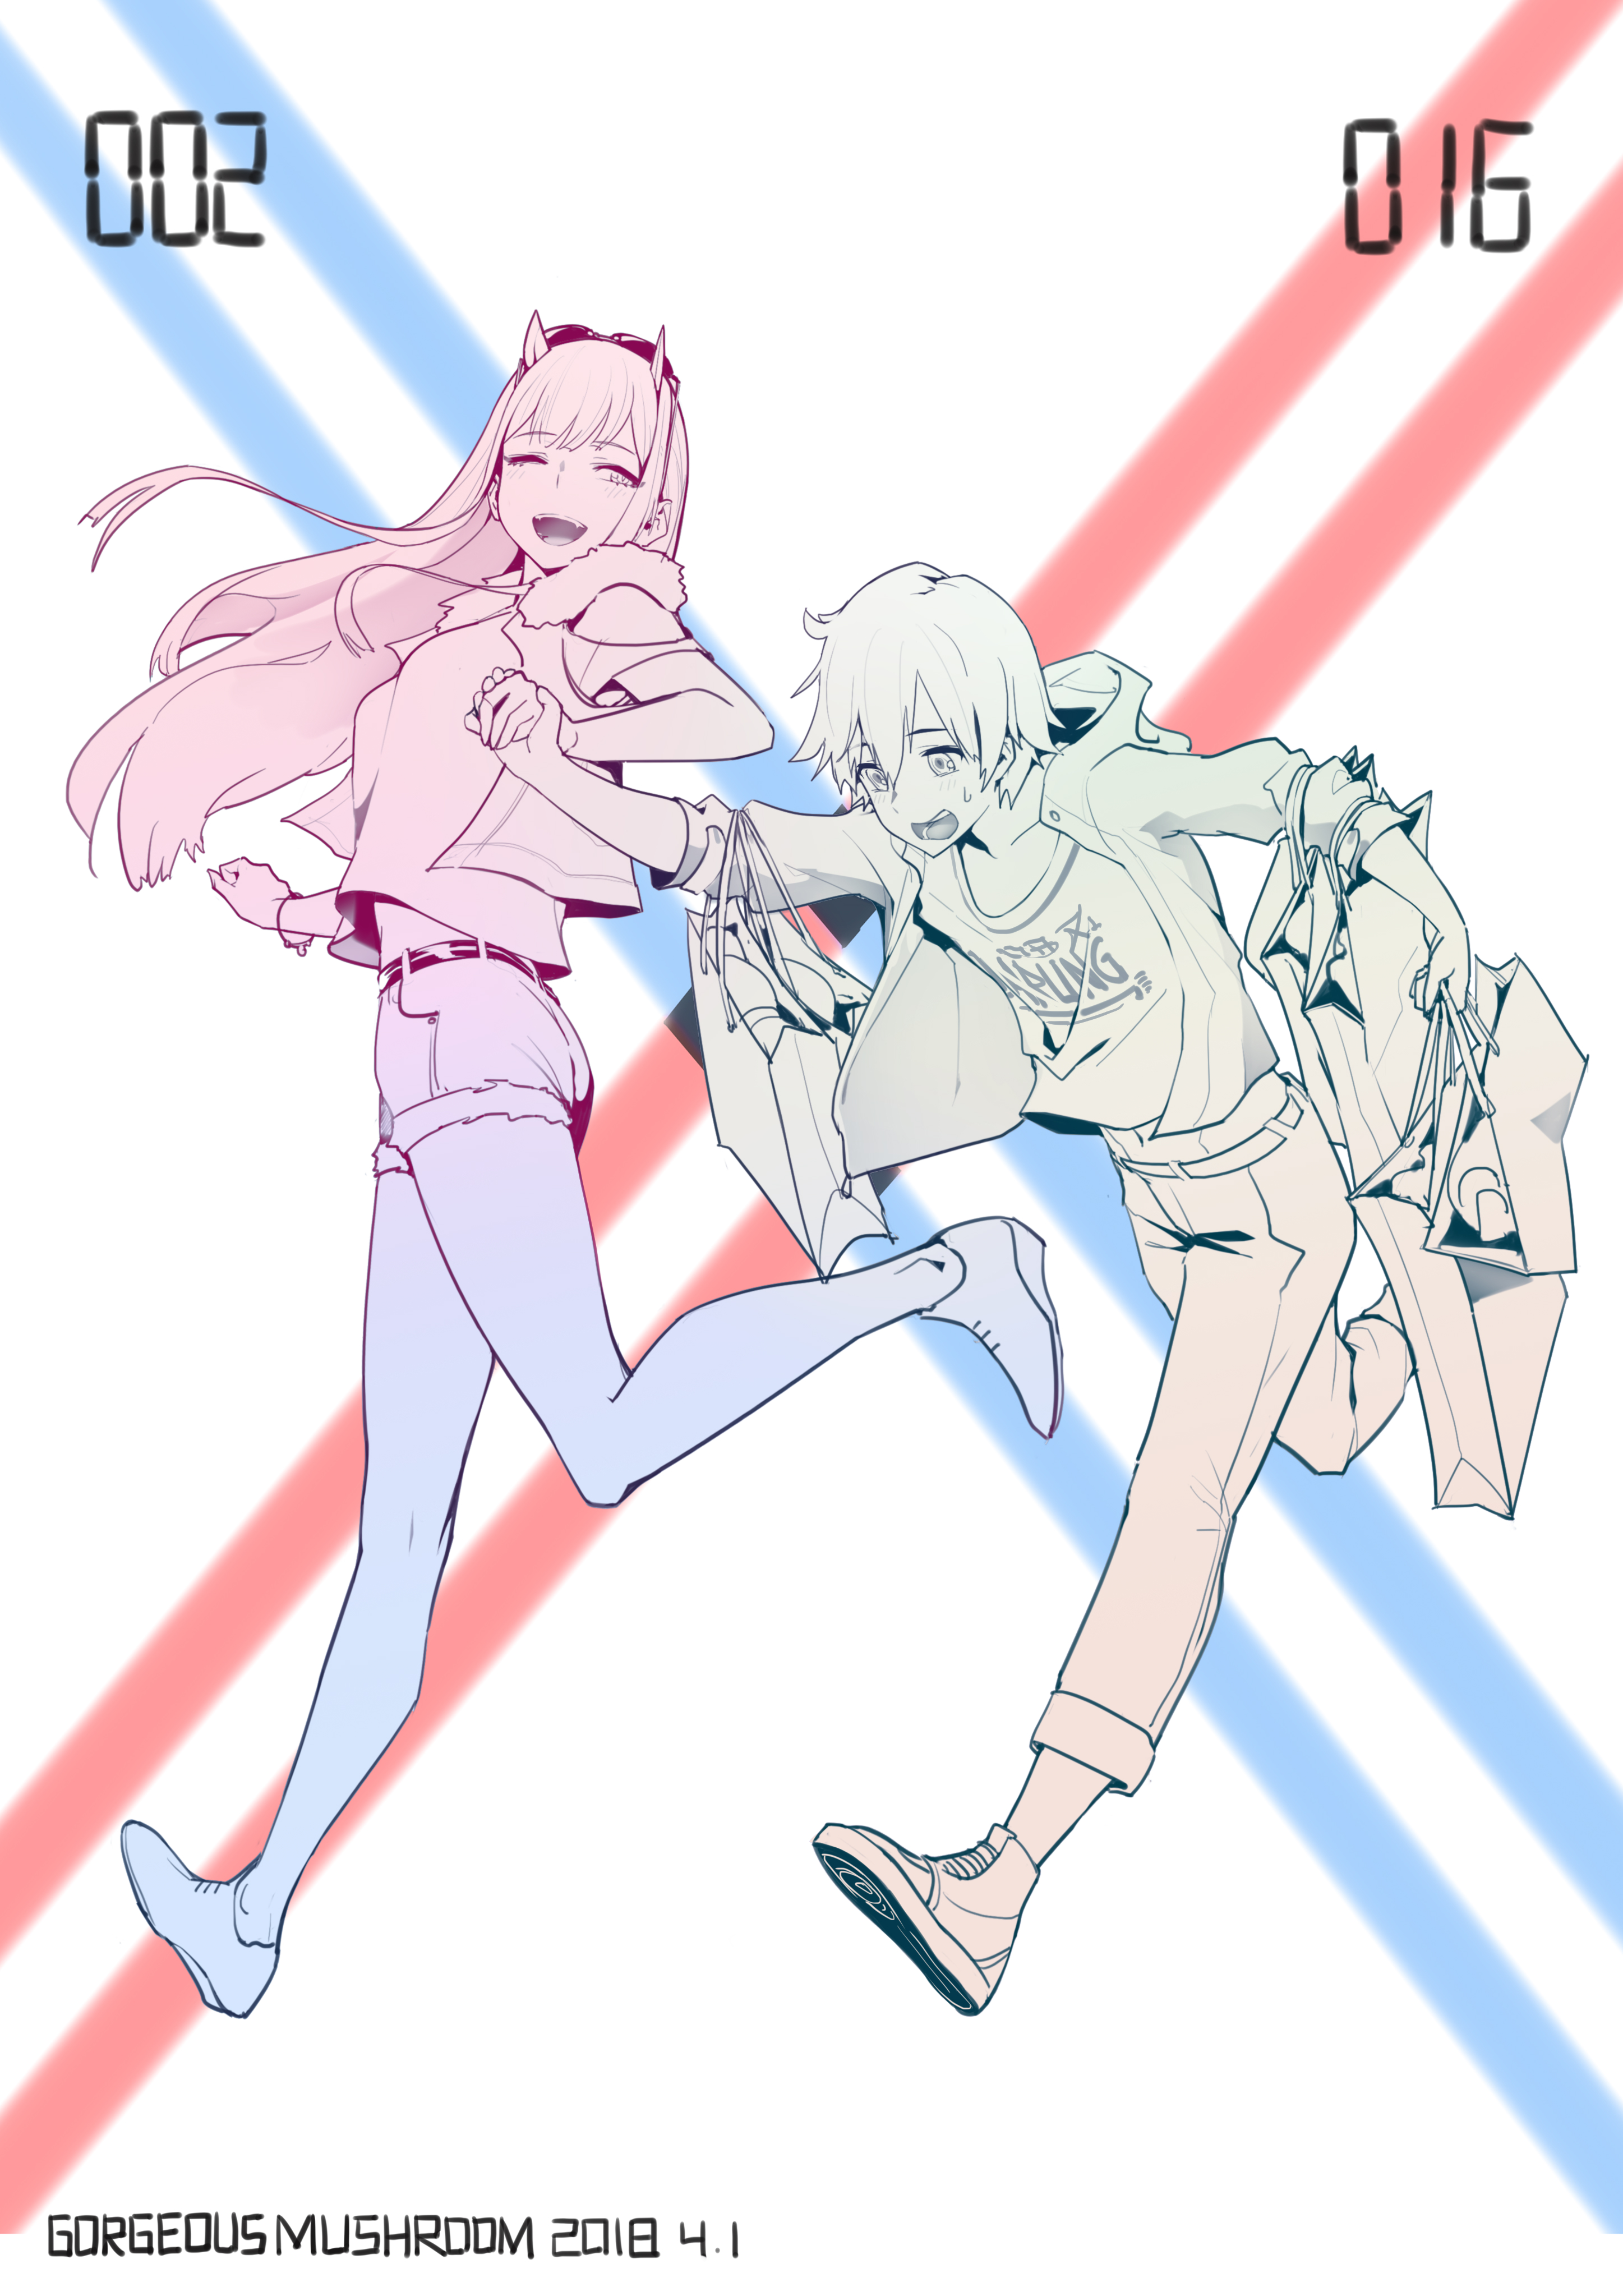 Anime 2894x4093 Darling in the FranXX Zero Two (Darling in the FranXX) Code:016 (Hiro)  simple background 2D running white t-shirt thighs sideboob jean shorts holding hands open mouth happy face one eye closed blushing long hair short hair horns belly anime boys anime girls fan art anime portrait display sweatdrop open jacket Gorgeous Mushroom couple looking below demon horns